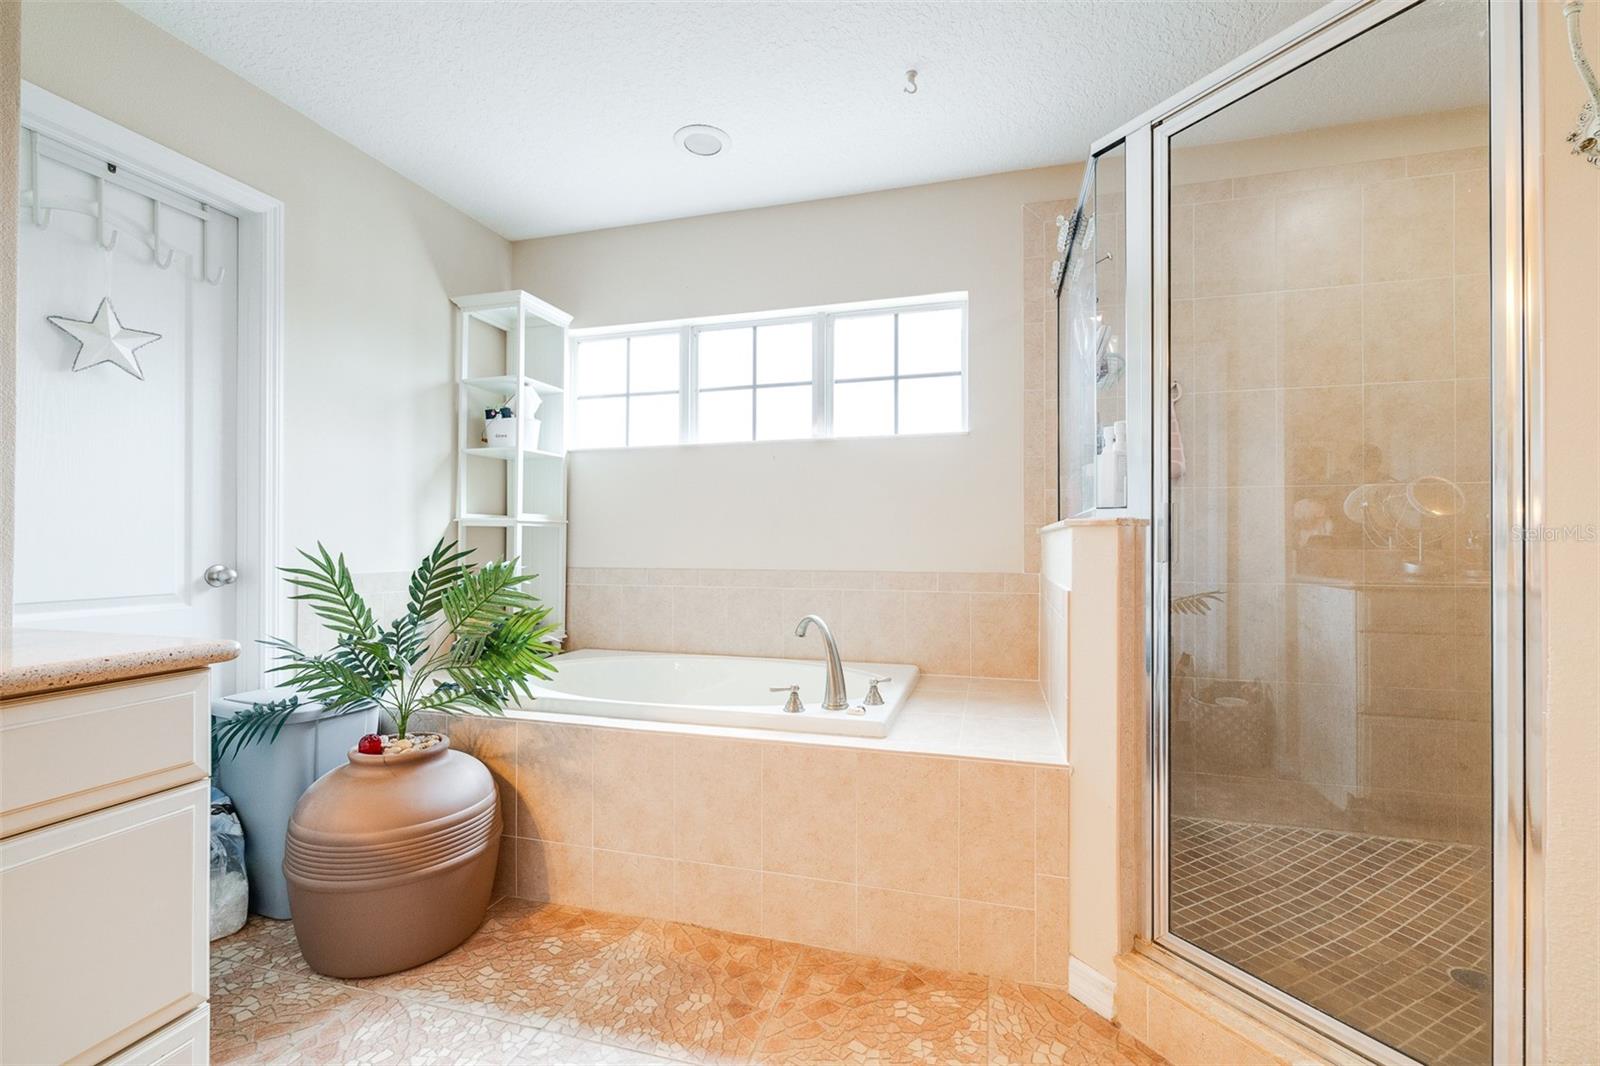 Shower and Garden Tub in Owner's Bathroom